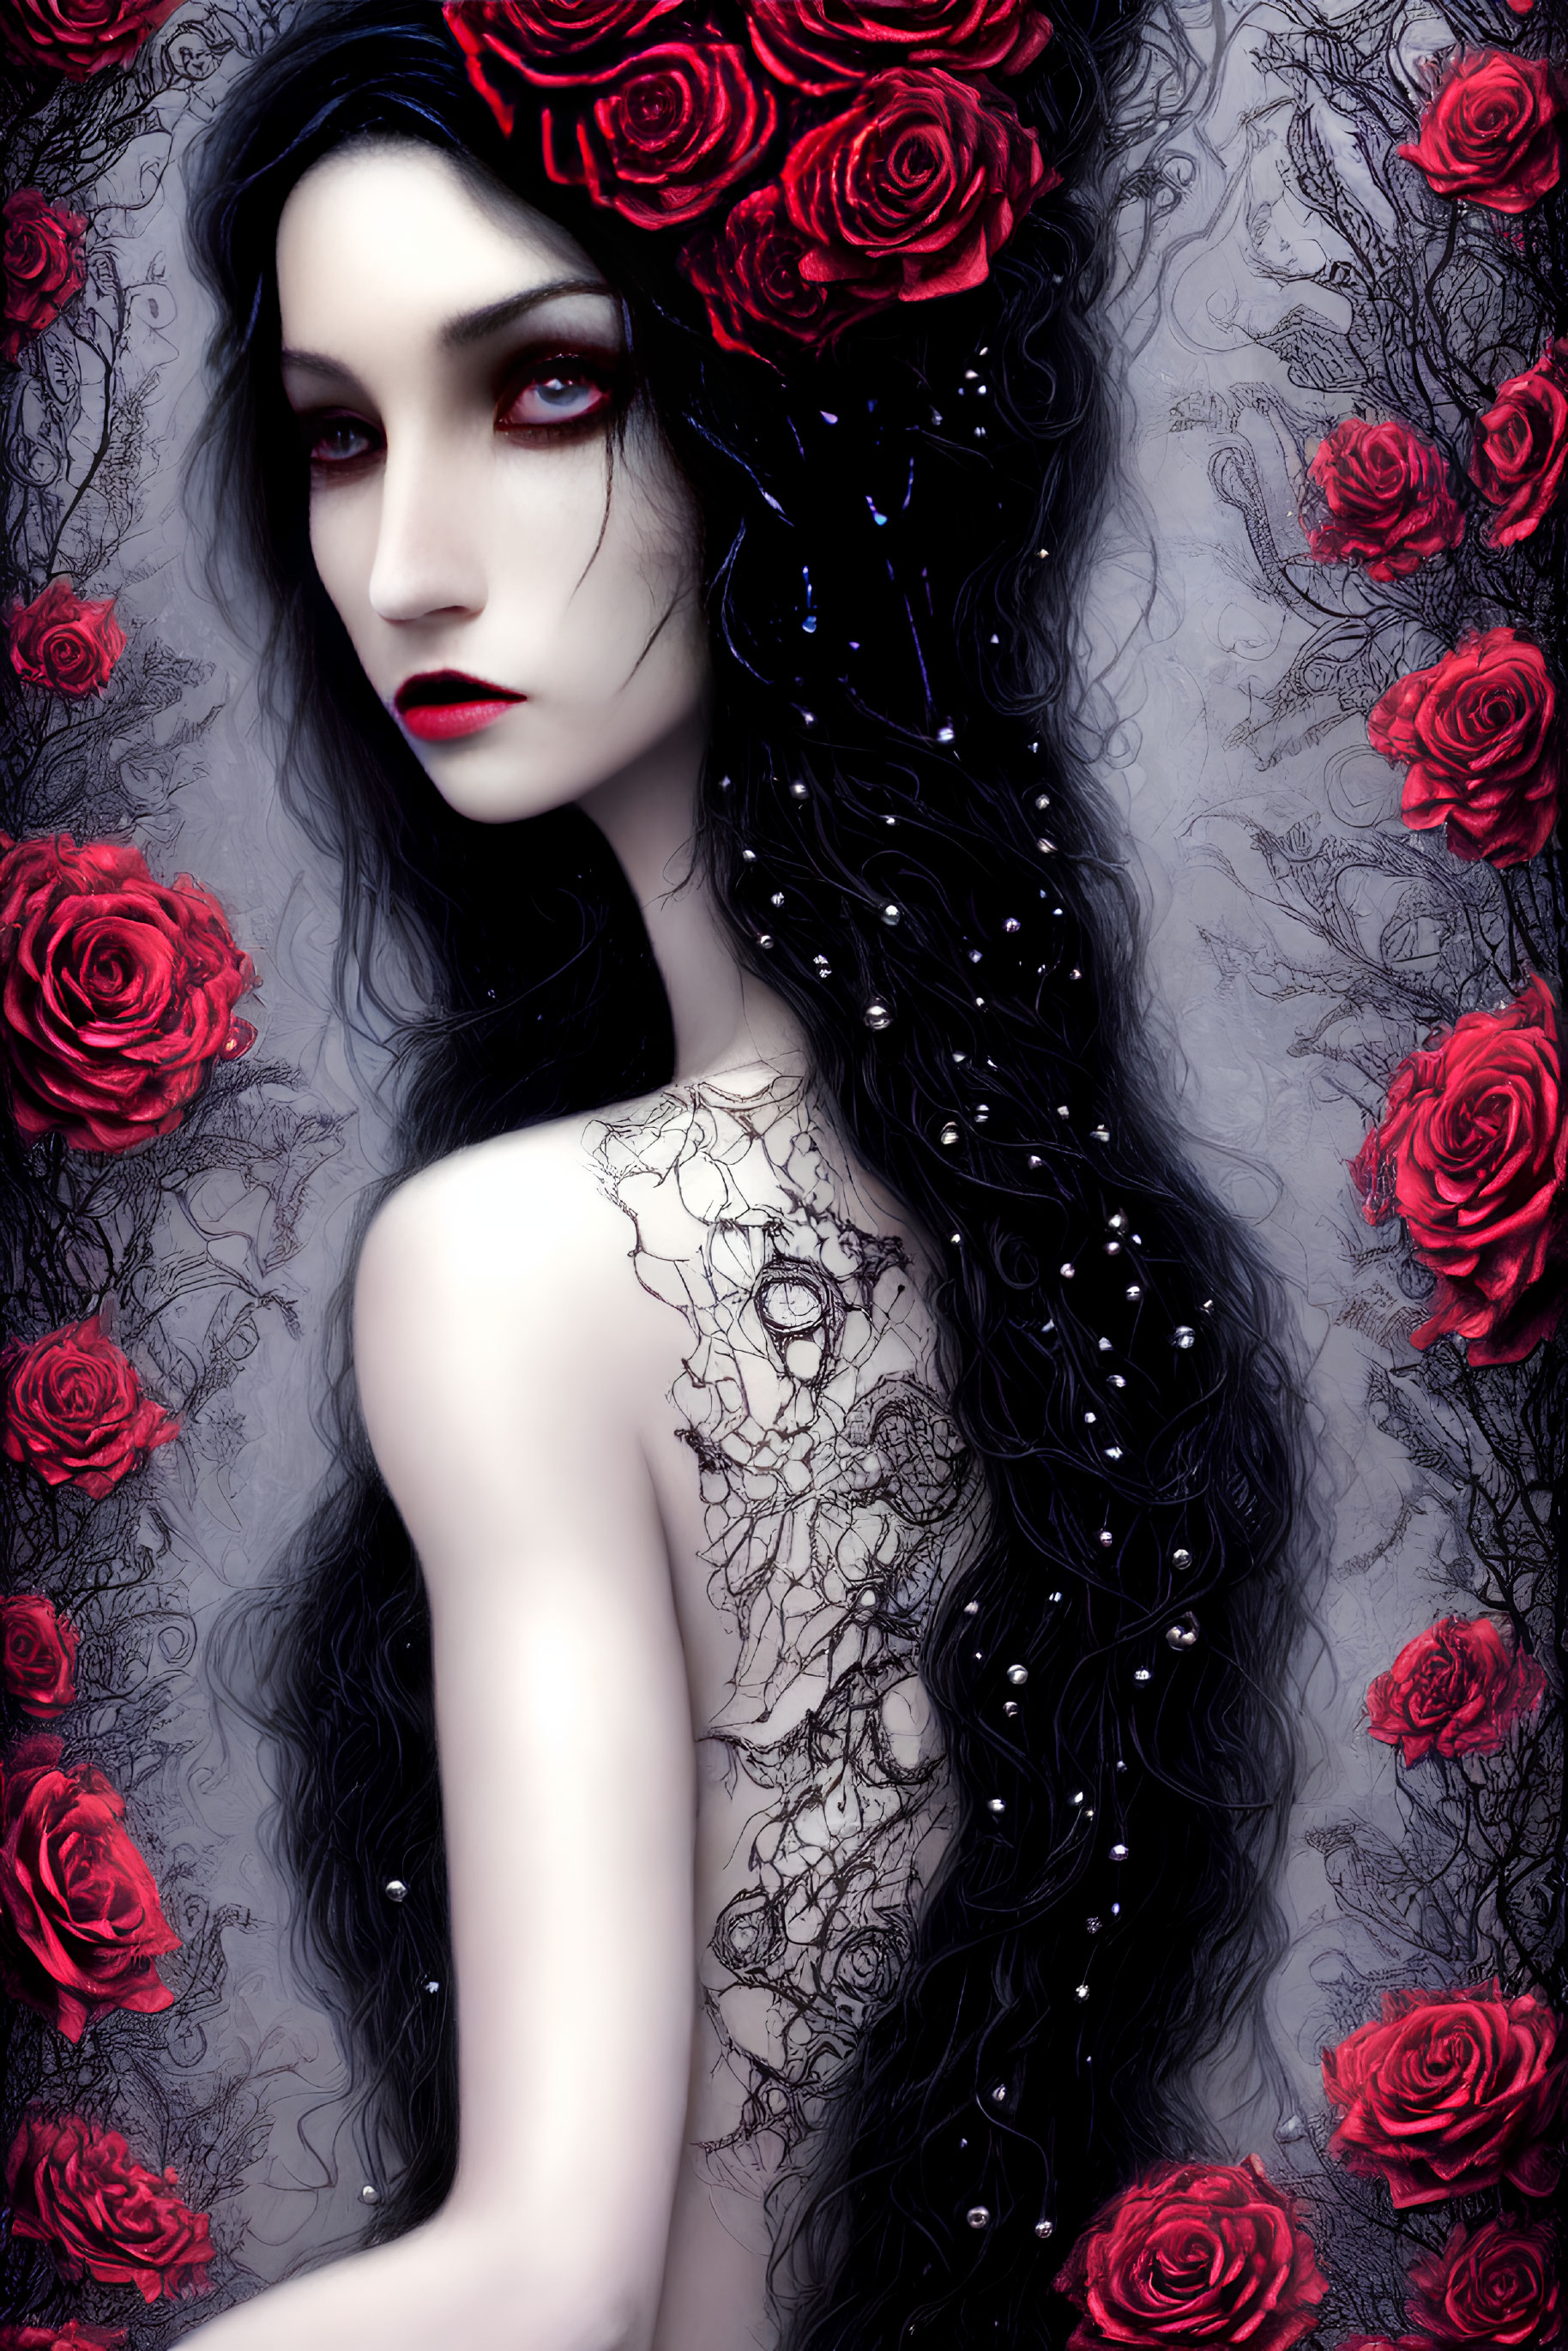 Pale woman with long black hair, red lips, surrounded by red roses, in lace dress - go